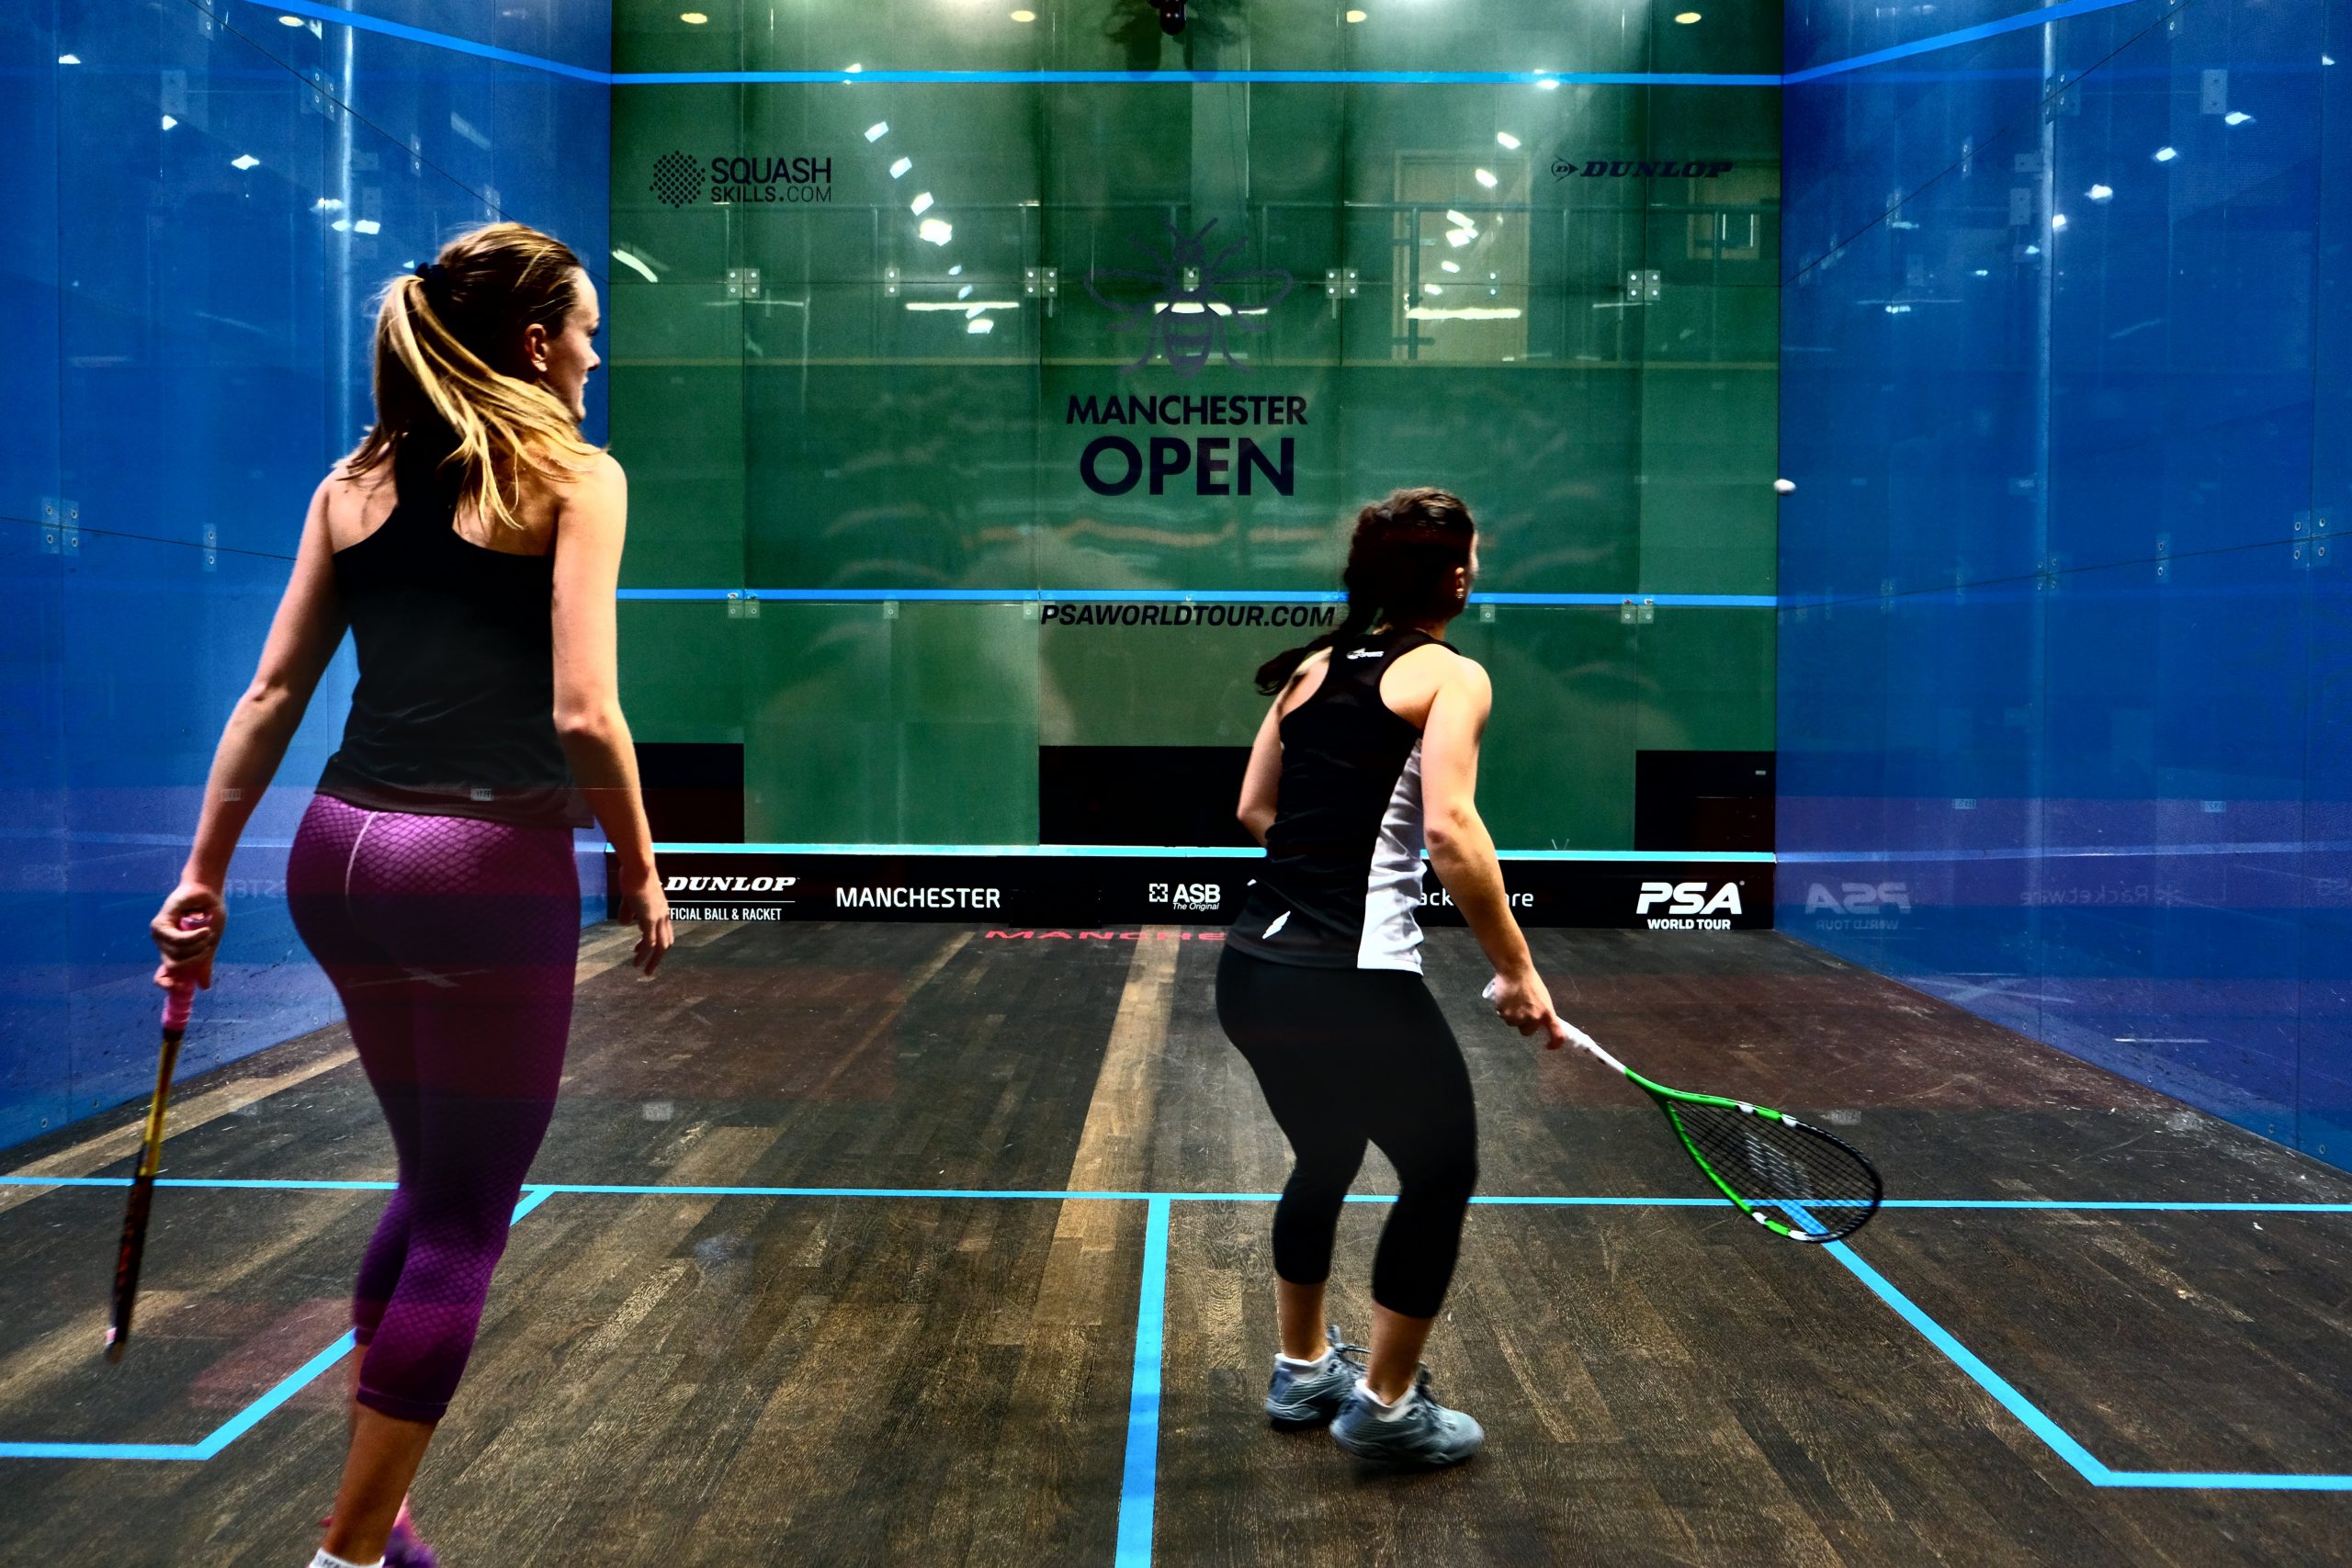 GALLERY Manchester Open Squash